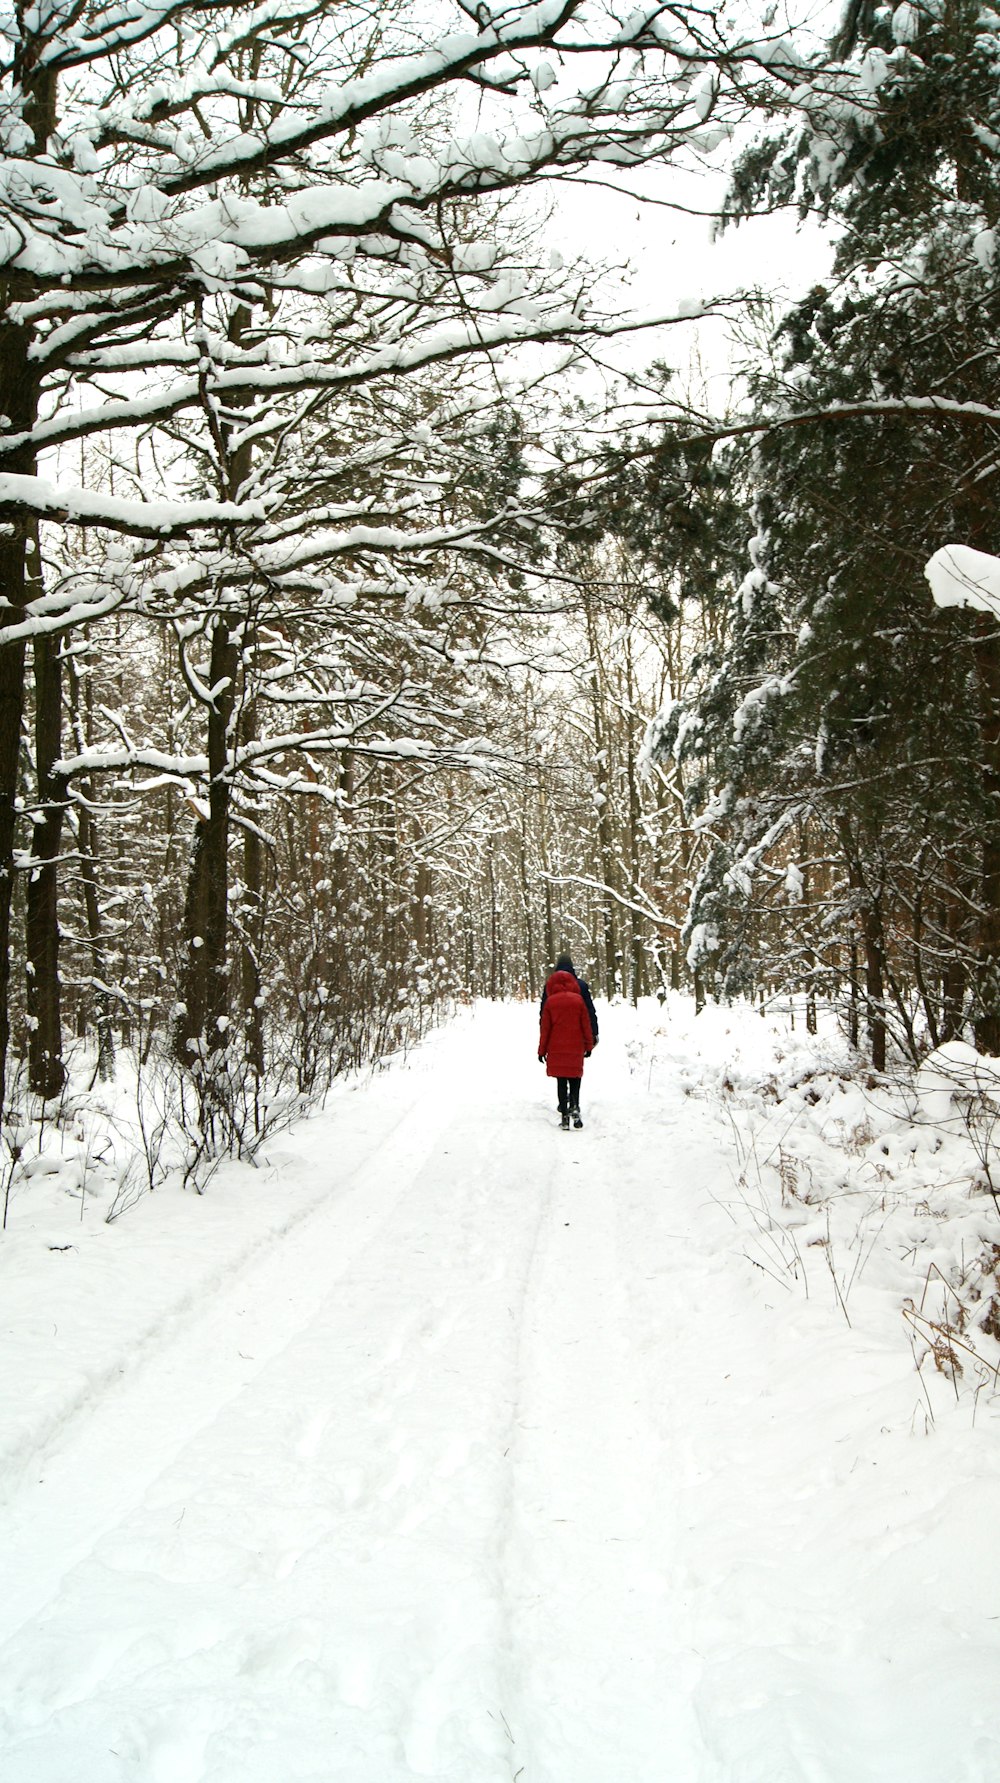 person in red jacket walking on snow covered pathway between bare trees during daytime